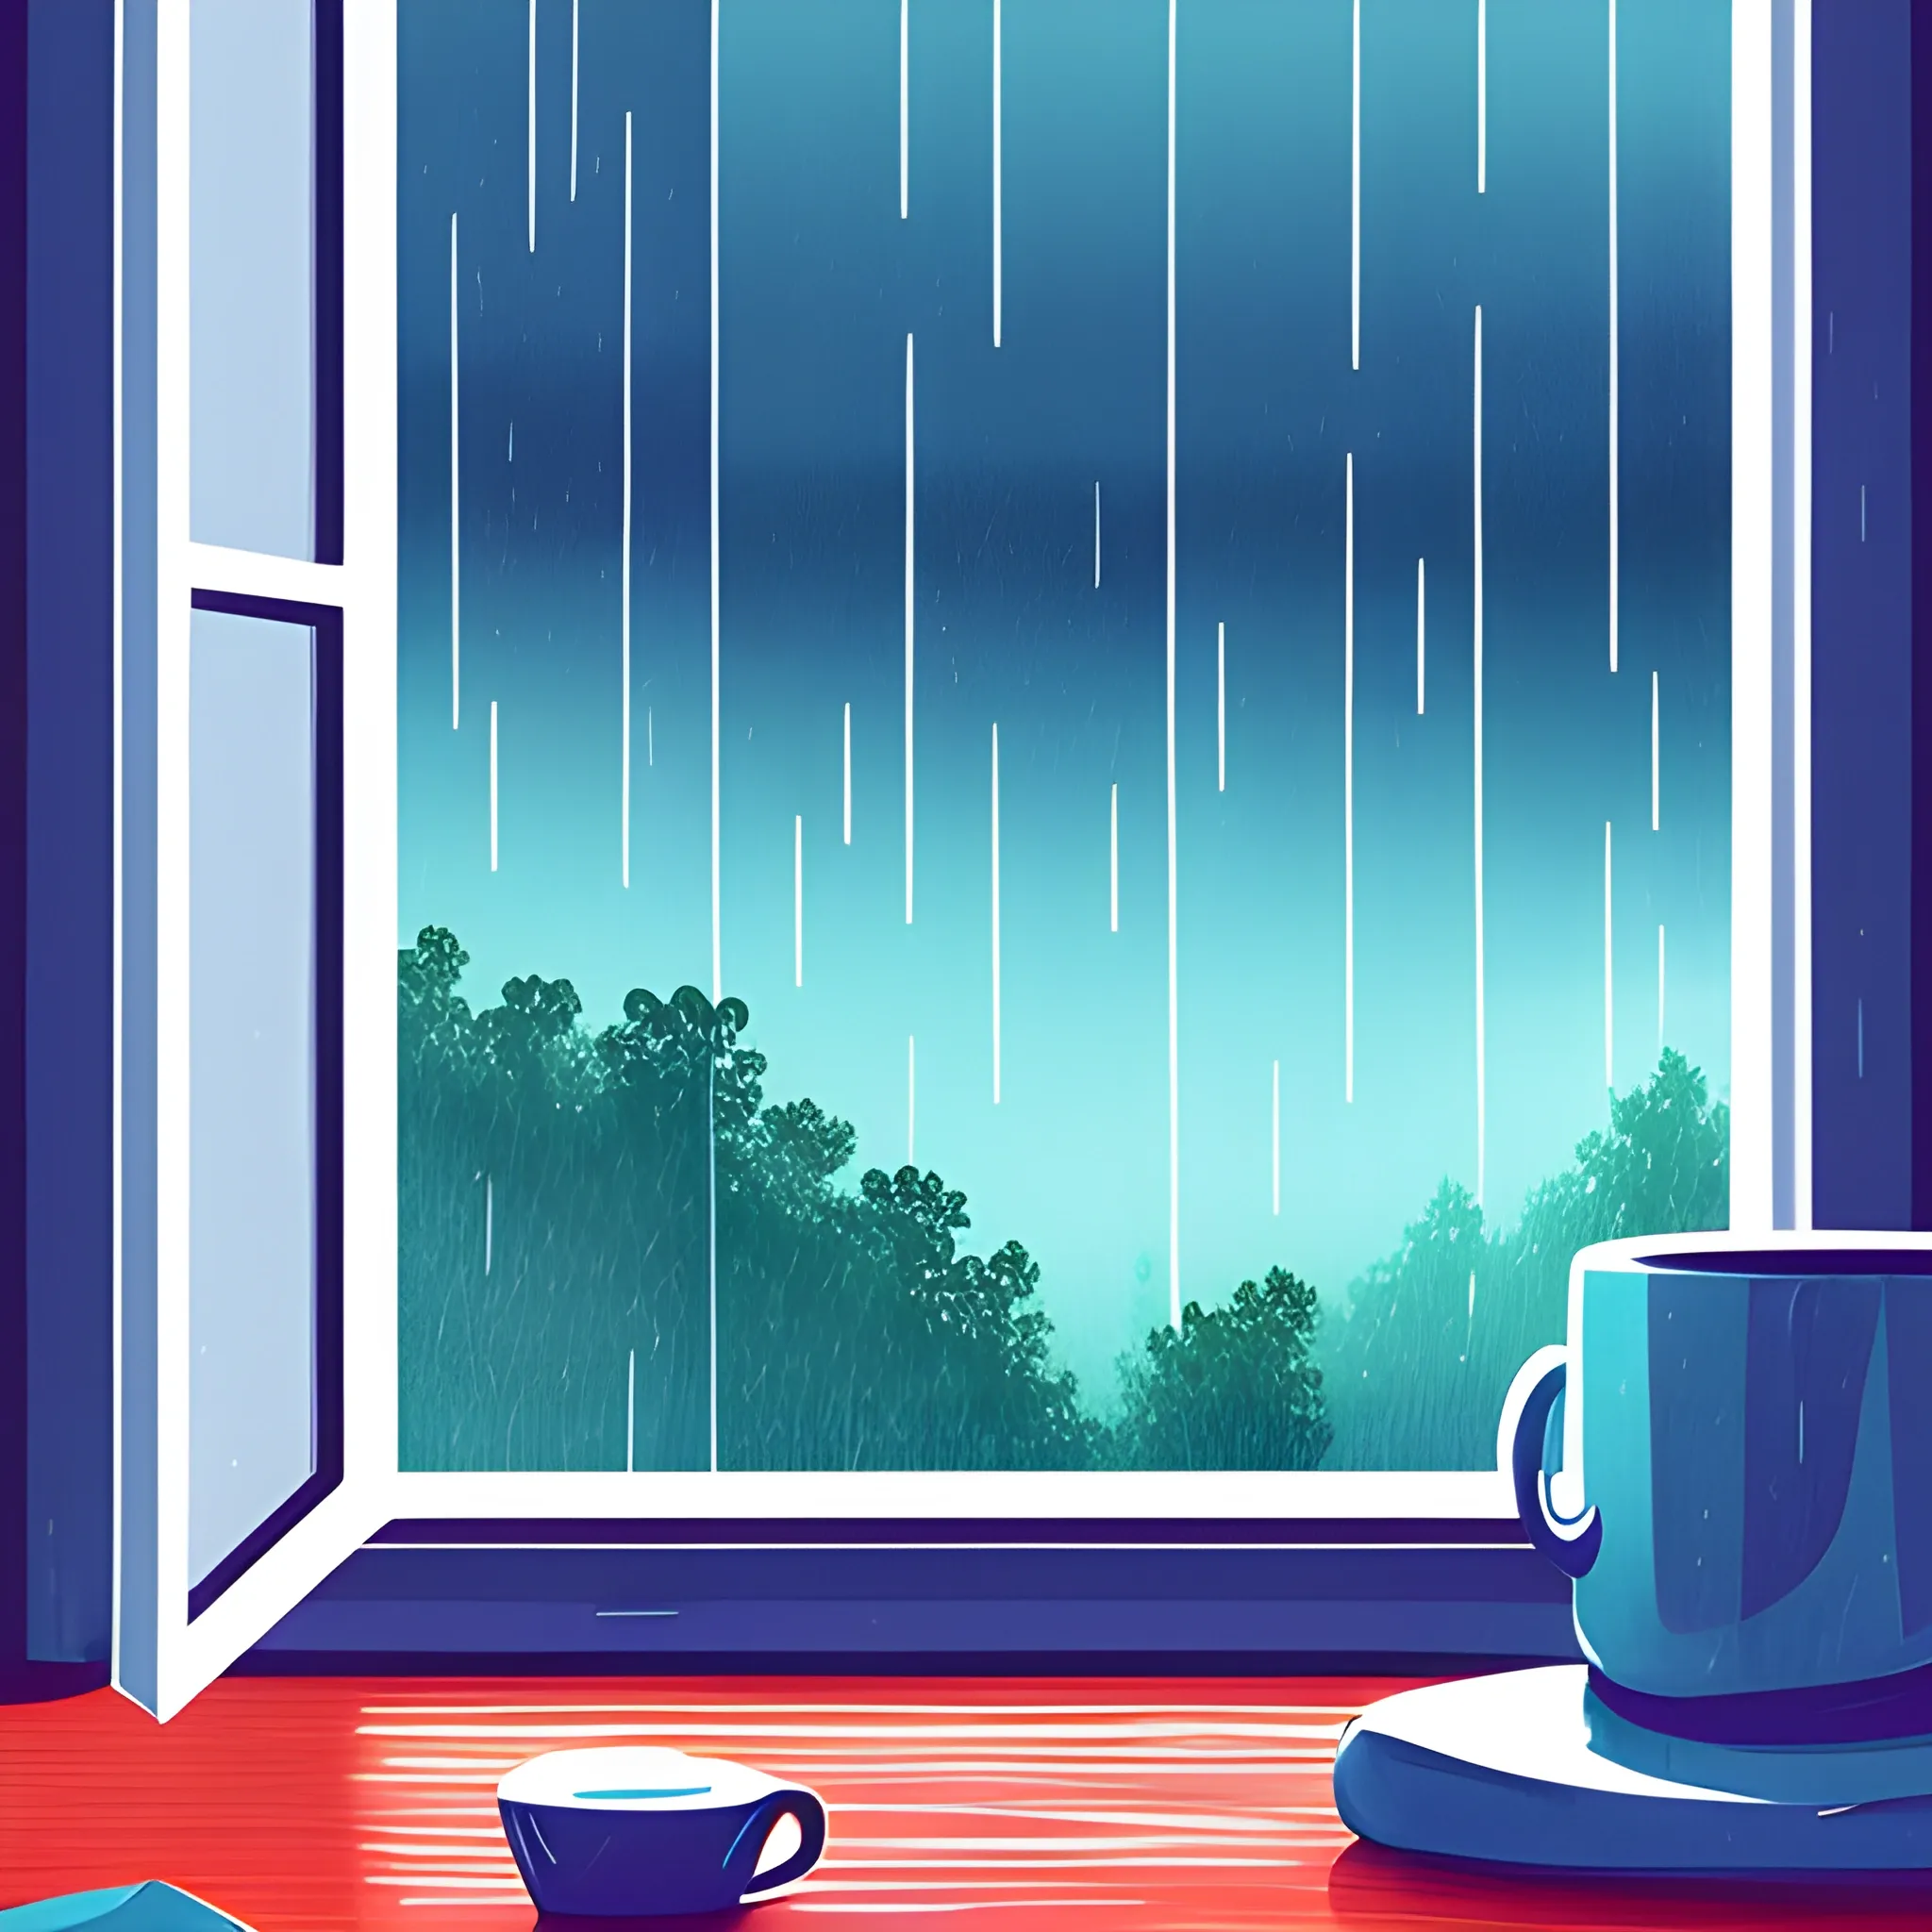 illustration of rainy day looking out of large window in digital painting style with cool colors